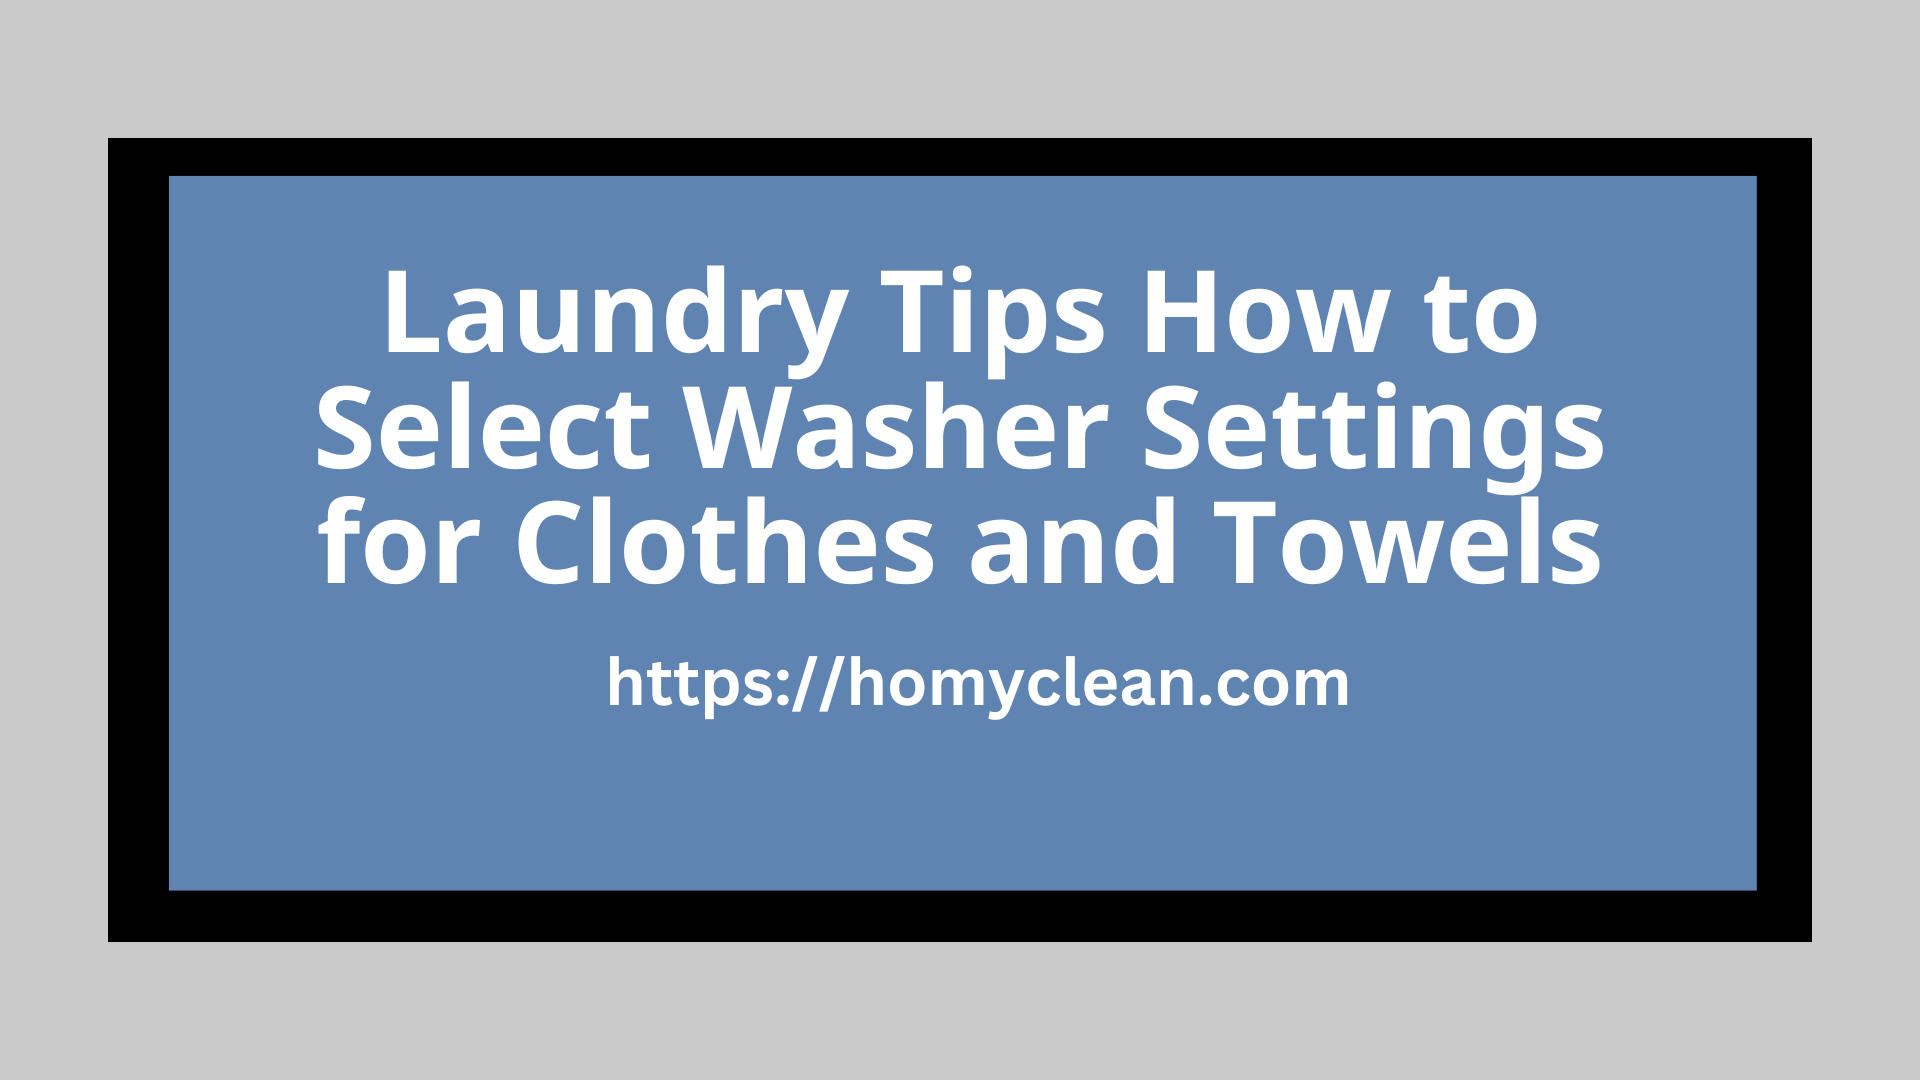 How to Select Washer Settings for Clothes and Towels – Mastering the Art of Laundry